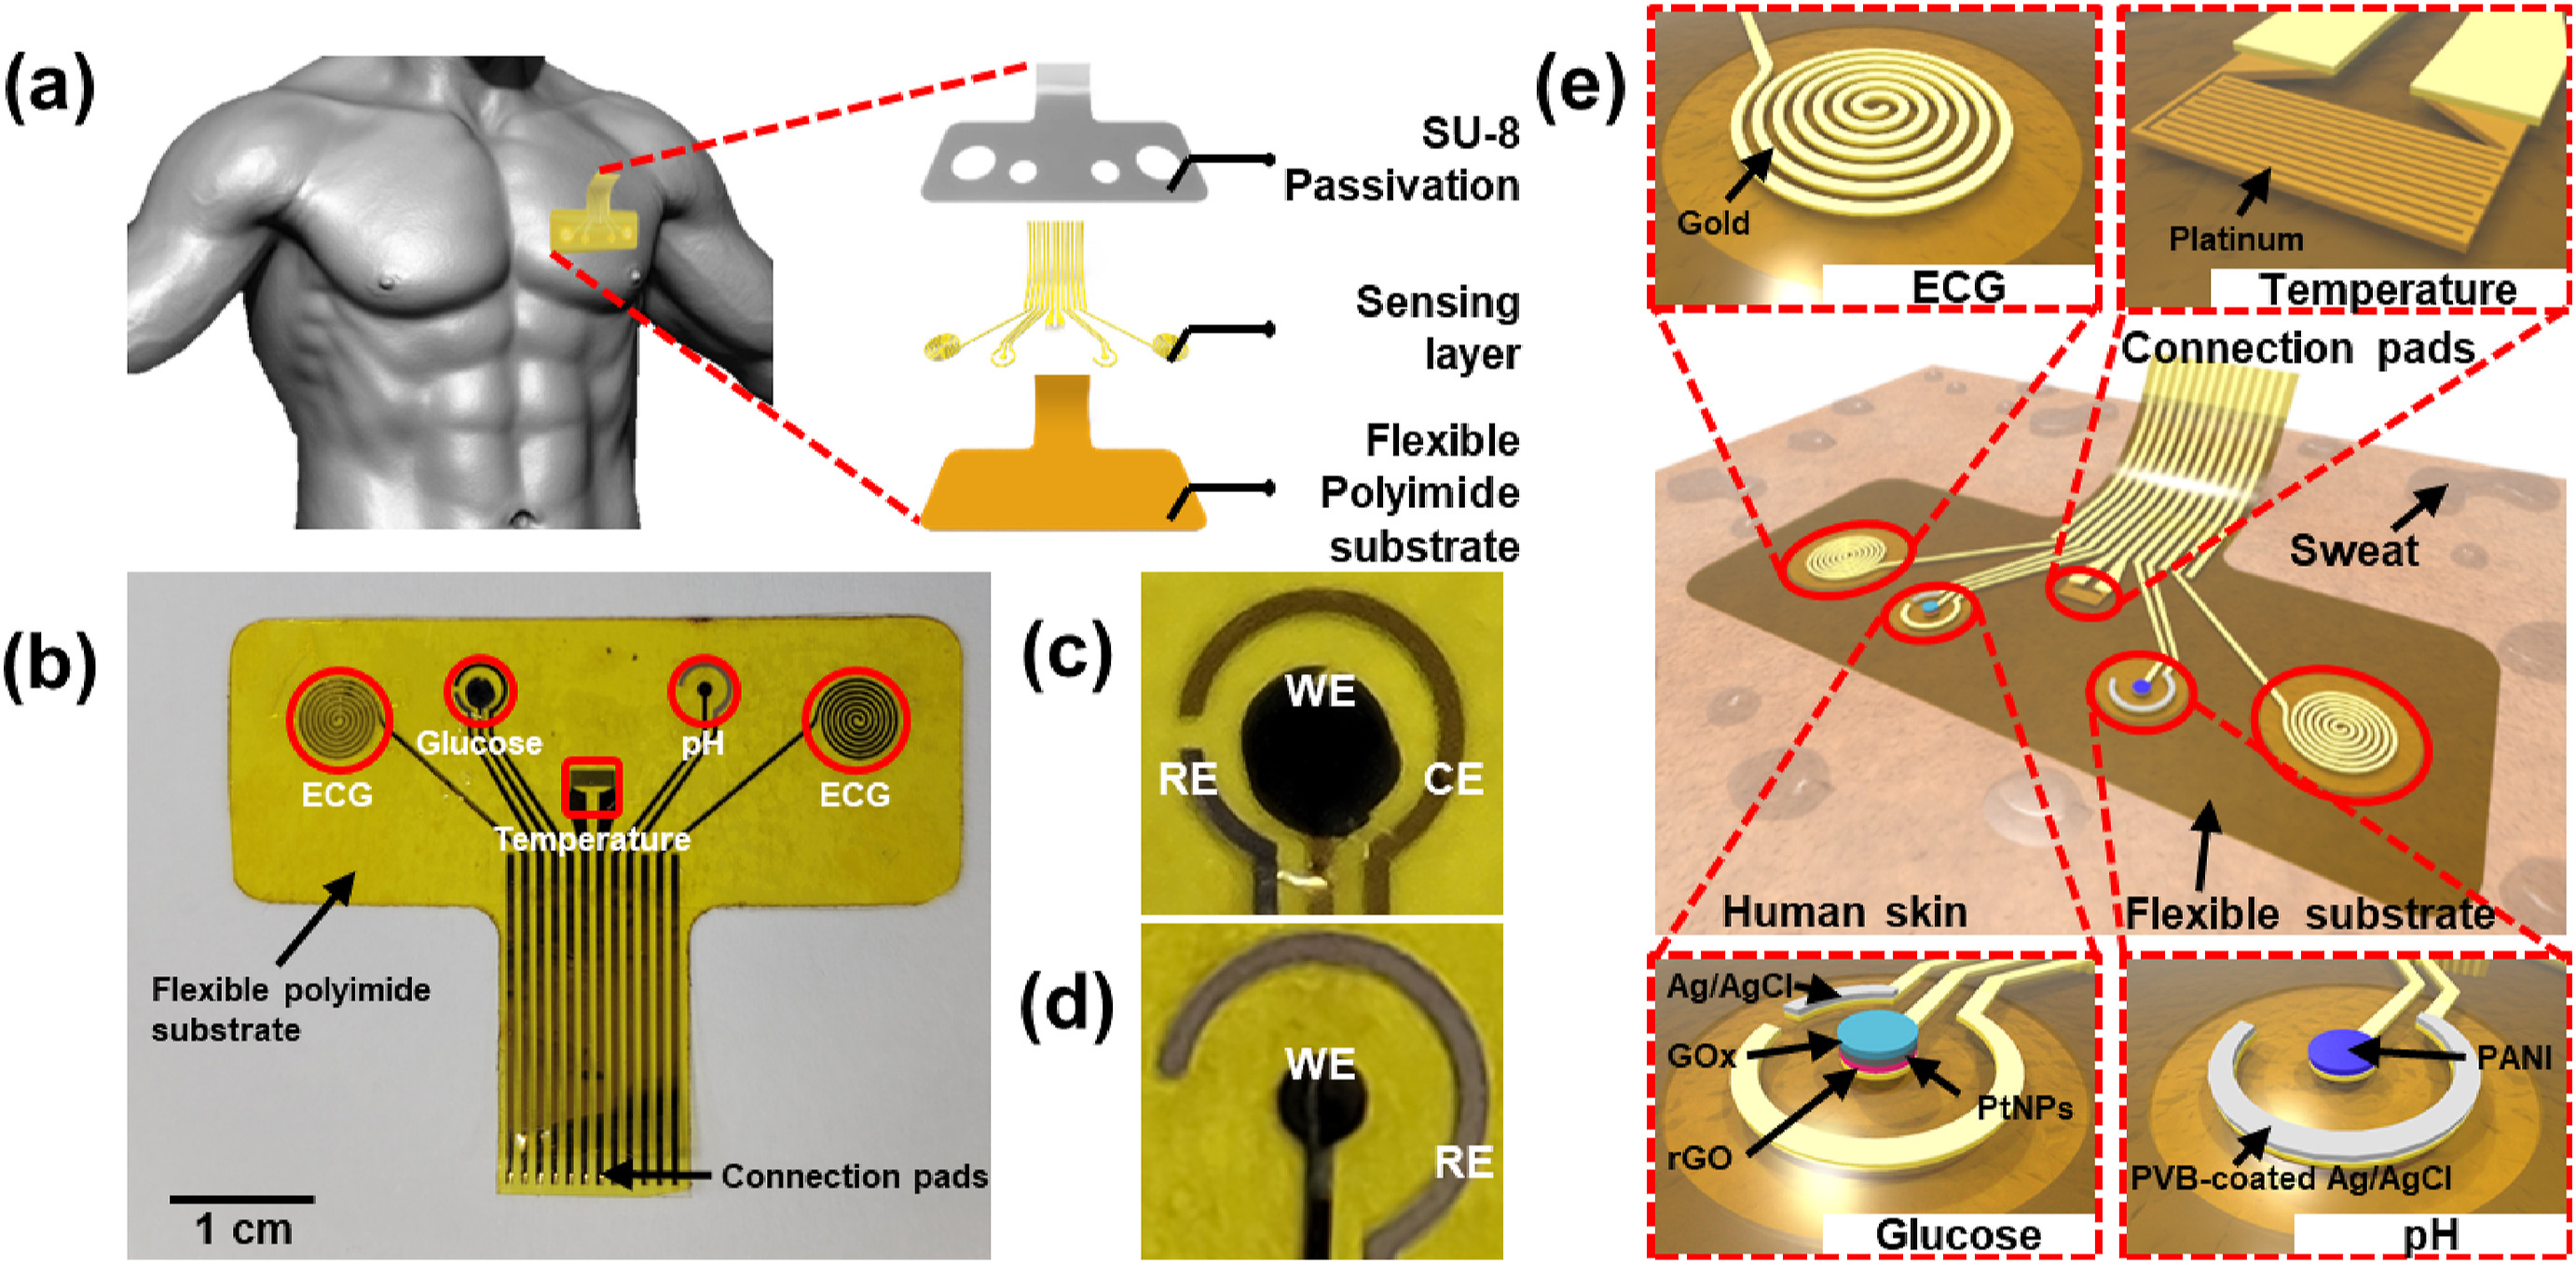 Multifunctional hybrid skin patch for wearable smart healthcare applications